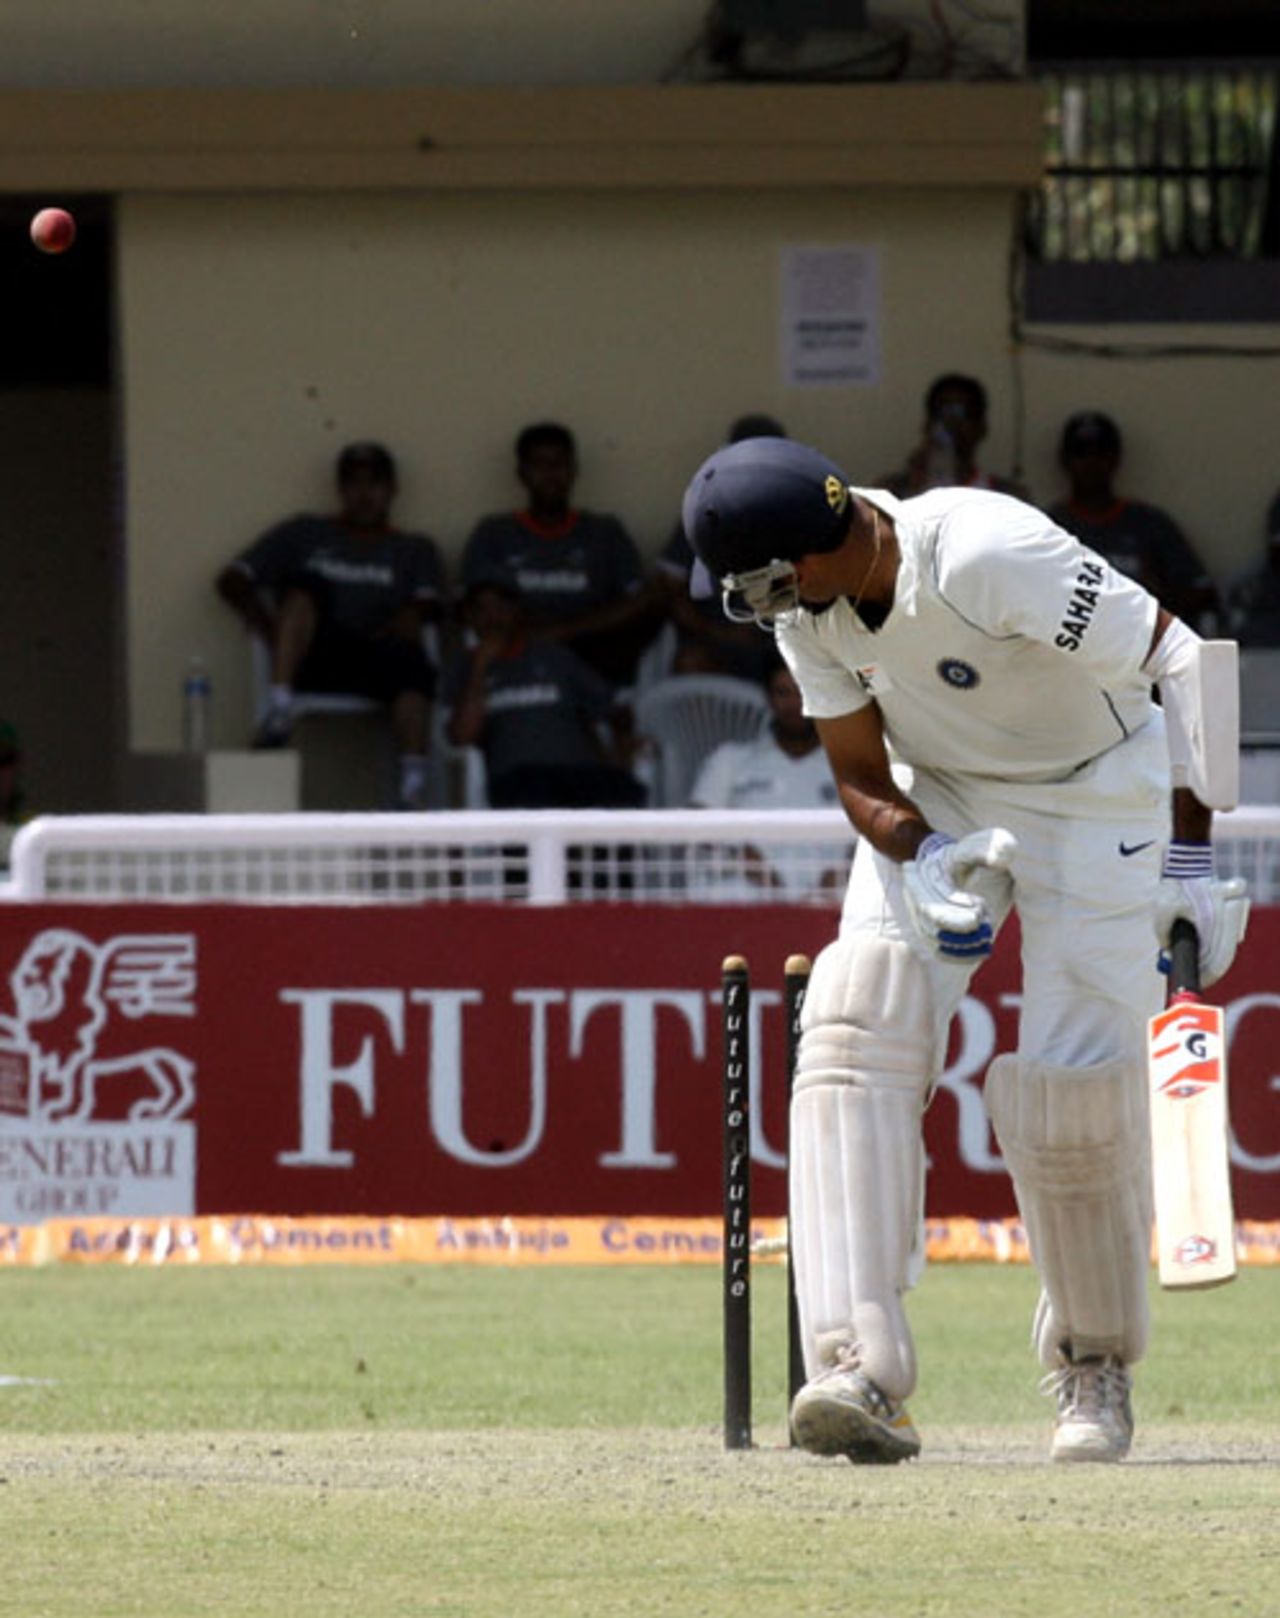 VVS Laxman looks back to see the stumps disturbed, India v South Africa, 3rd Test, Kanpur, 2nd day, April 12, 2008 